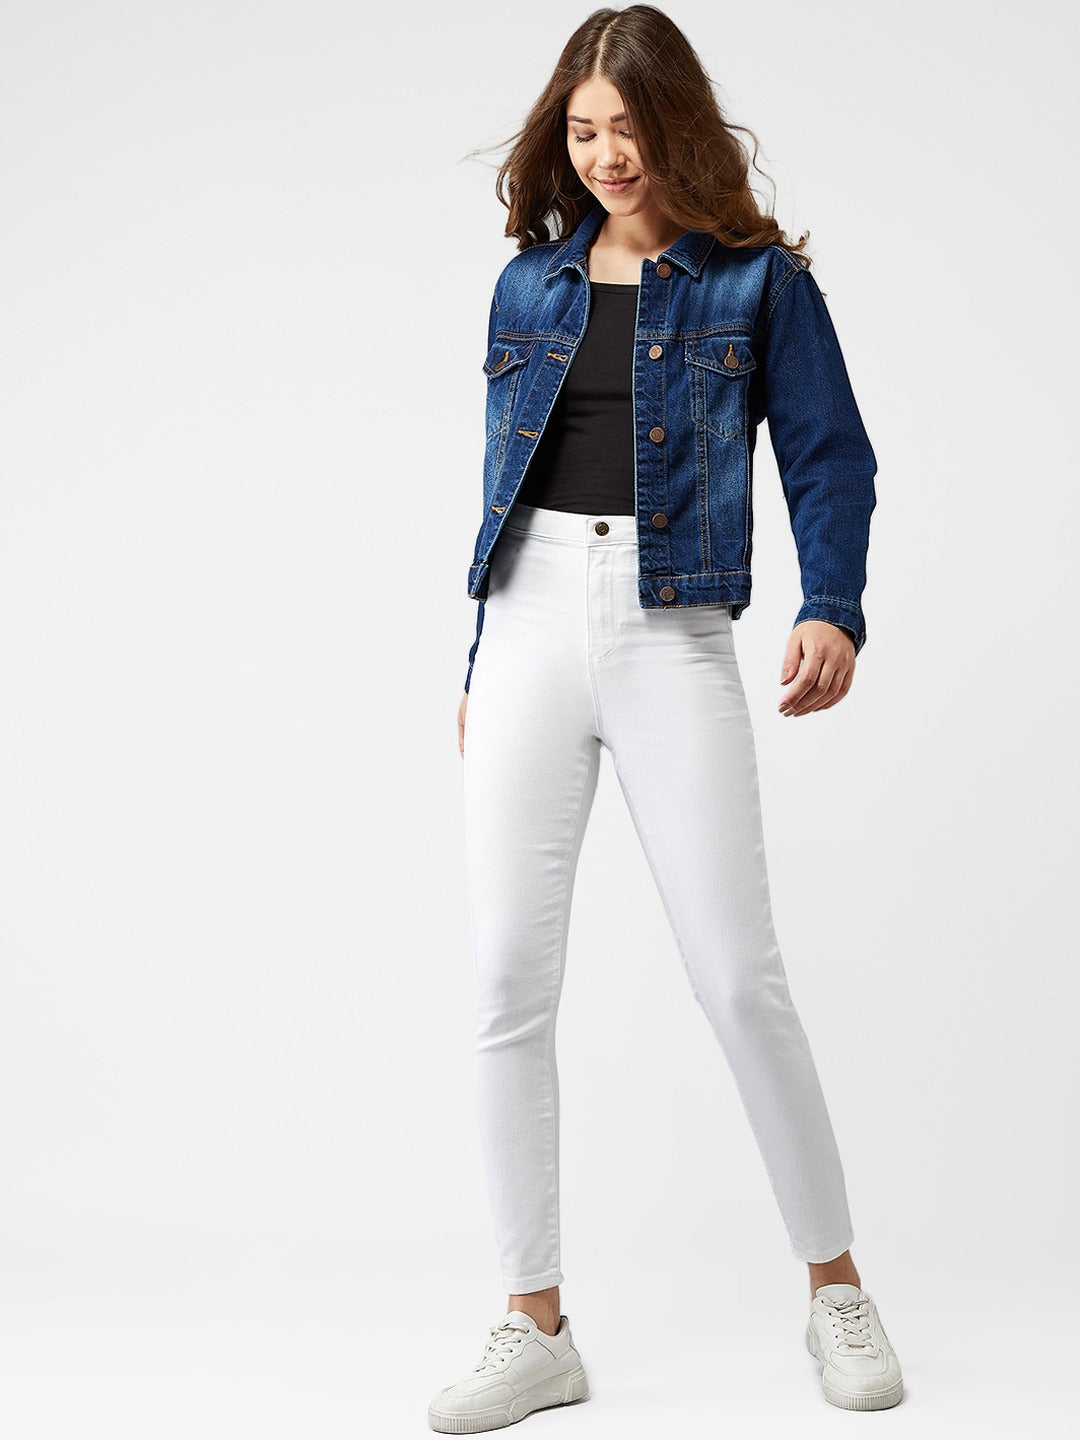 Stylish woman's blue denim jacket with white skinny jeans and casual sneakers.